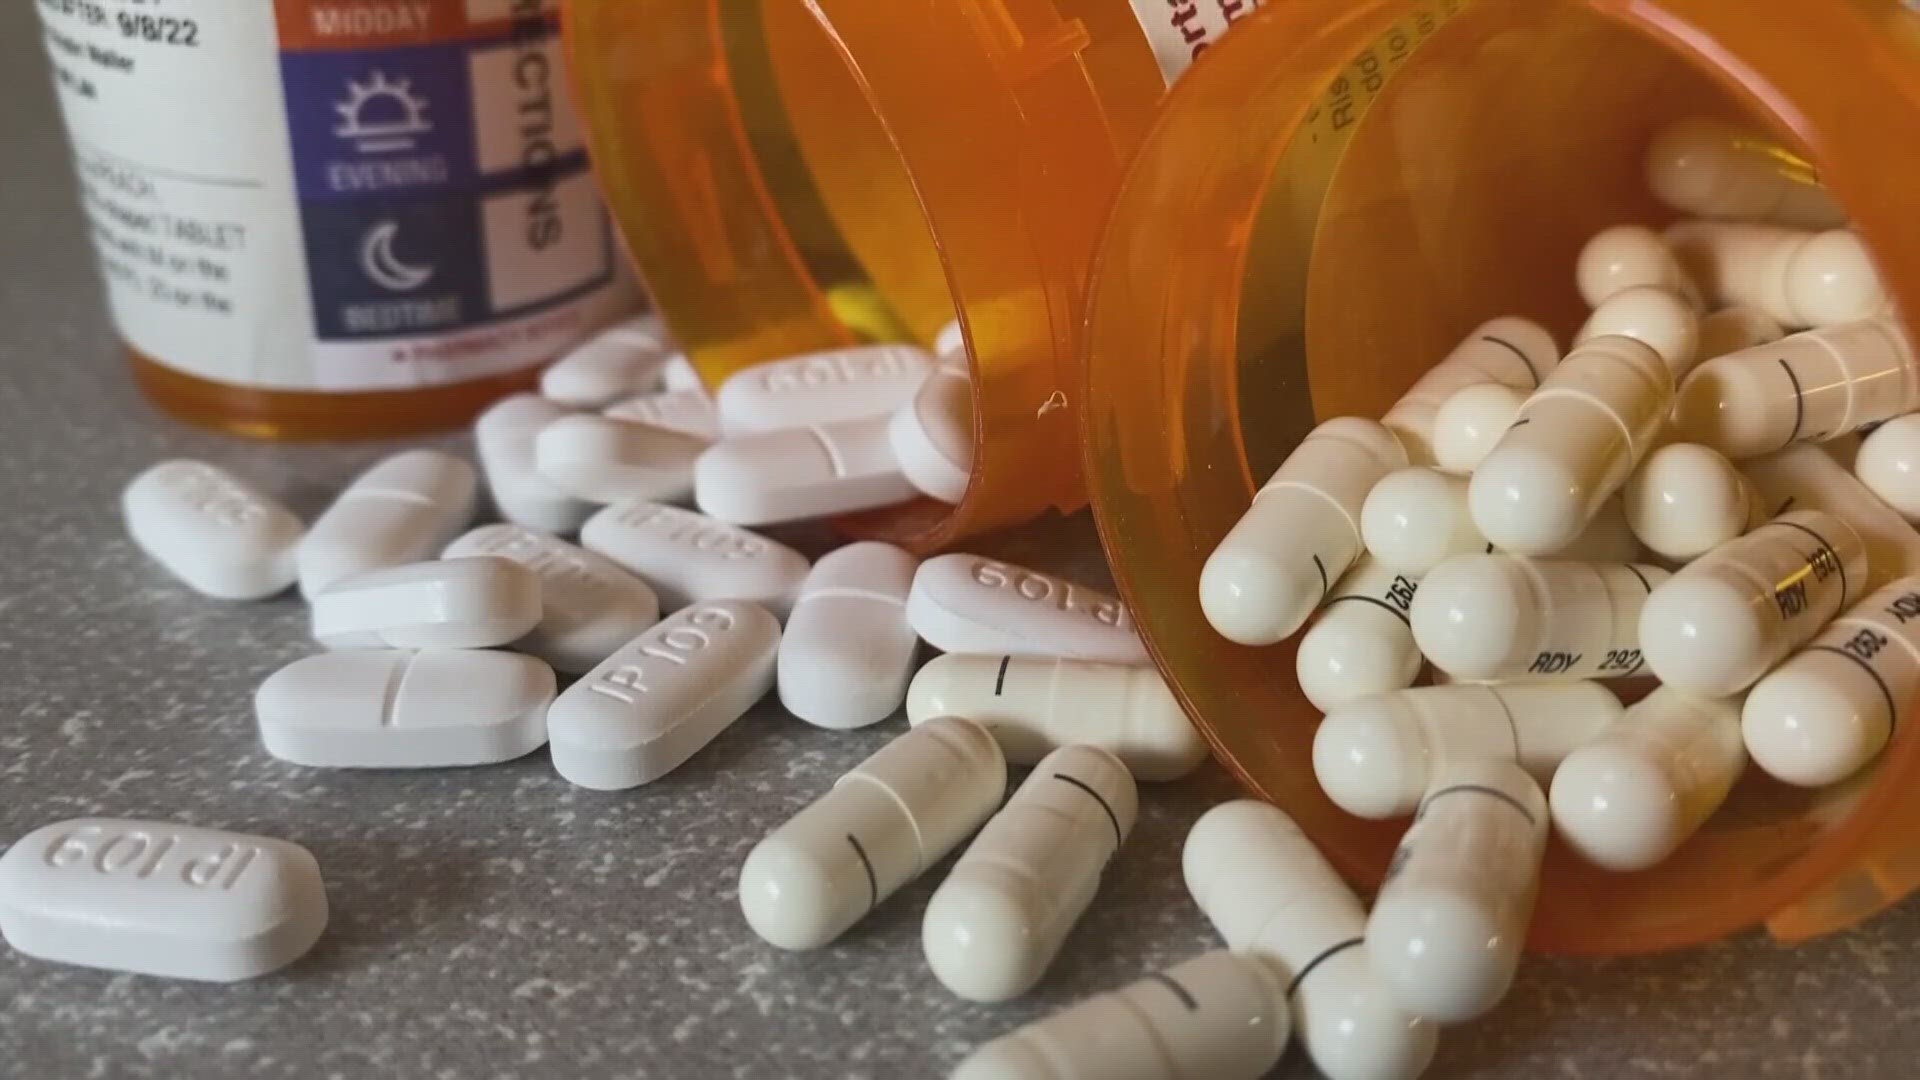 This new program, which is part of the "Billion Pill Pledge", is an opioid use prevention program designed to support patients through surgery and recovery.